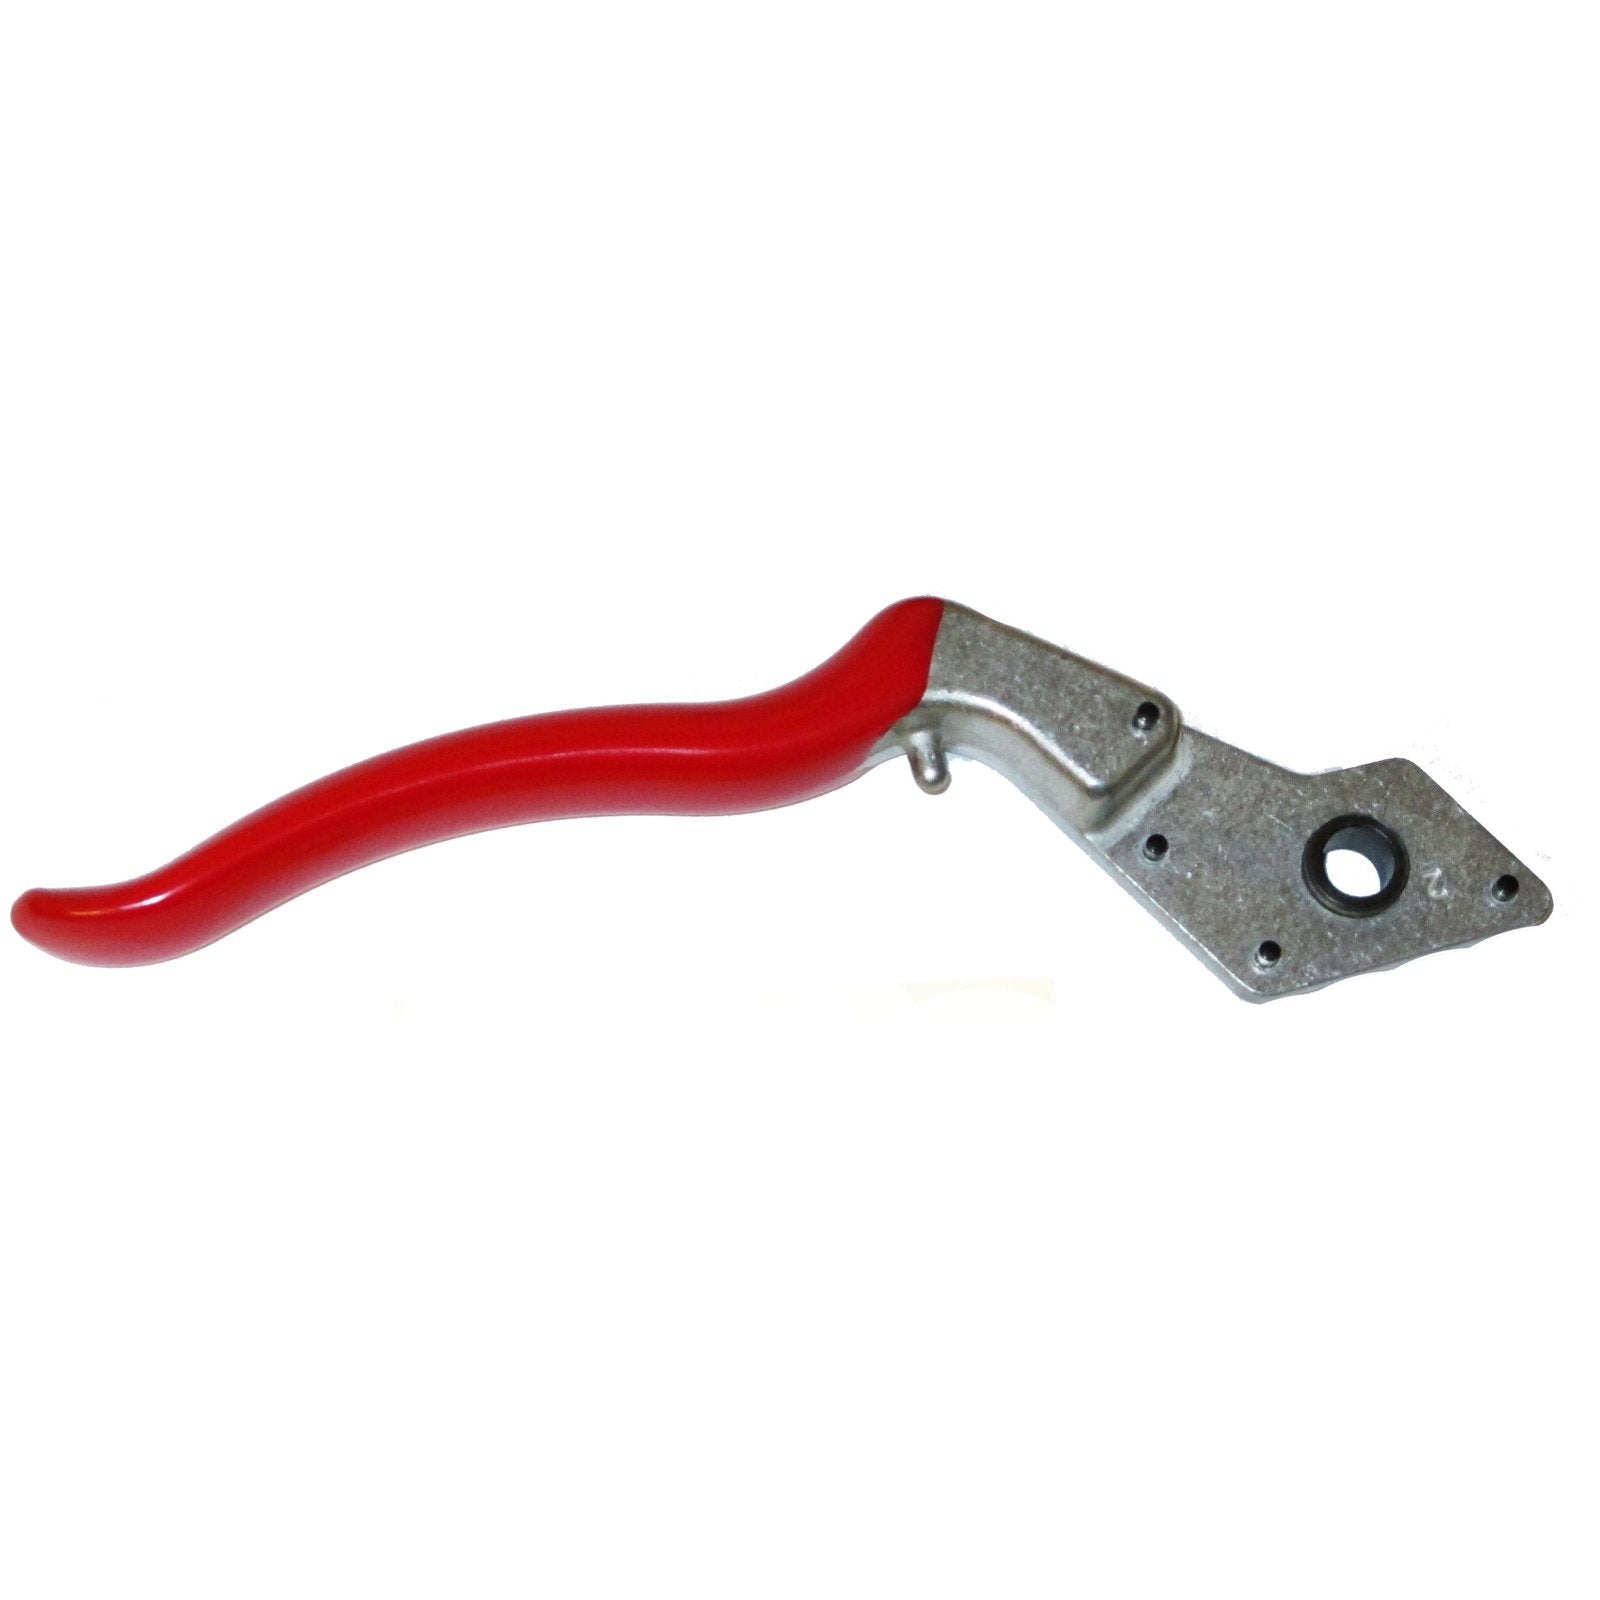 Felco Replacement Handle without blade 30/1